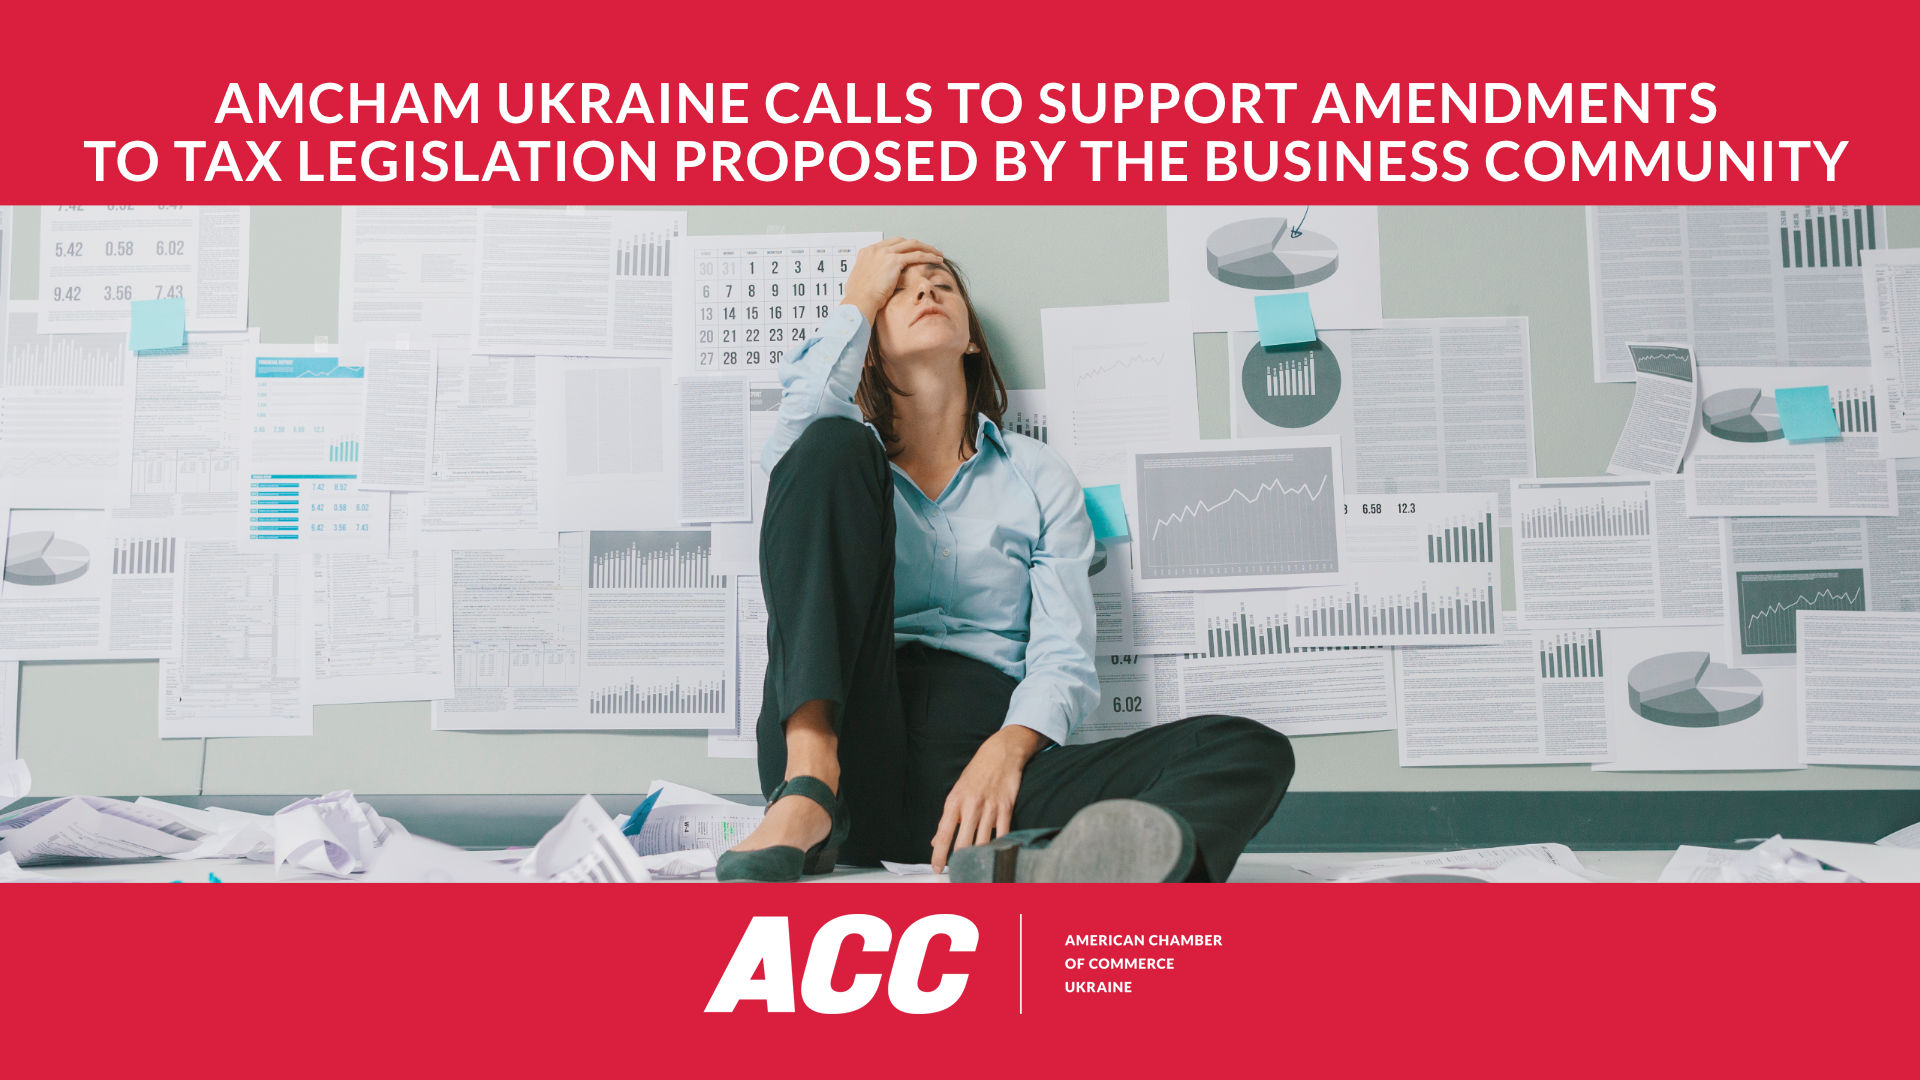 AmCham Ukraine Calls to Support Amendments to Tax Legislation Proposed by the Business Community